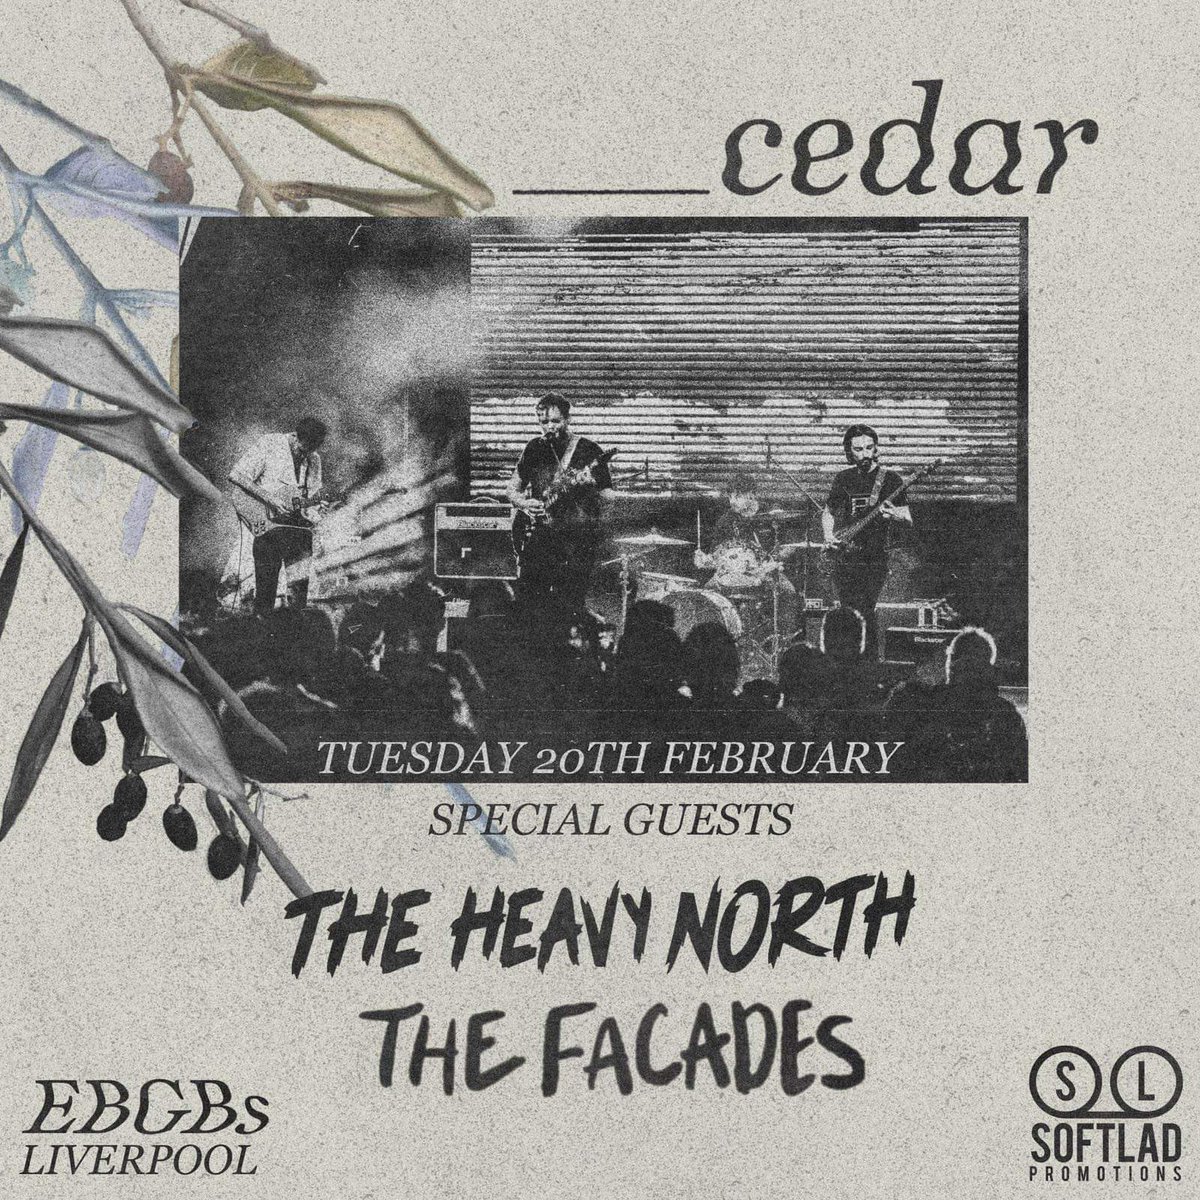 GIG NEWS! Alannah and Evan will be heading to @ebgbsliverpool 2 weeks today doing a little acoustic set supporting our friends Cedar on their UK tour, alongside the brilliant @theheavynorth Going to be a busy night! Tickets on sale now, link in our bio❤️ 📸 @kieraxdavies